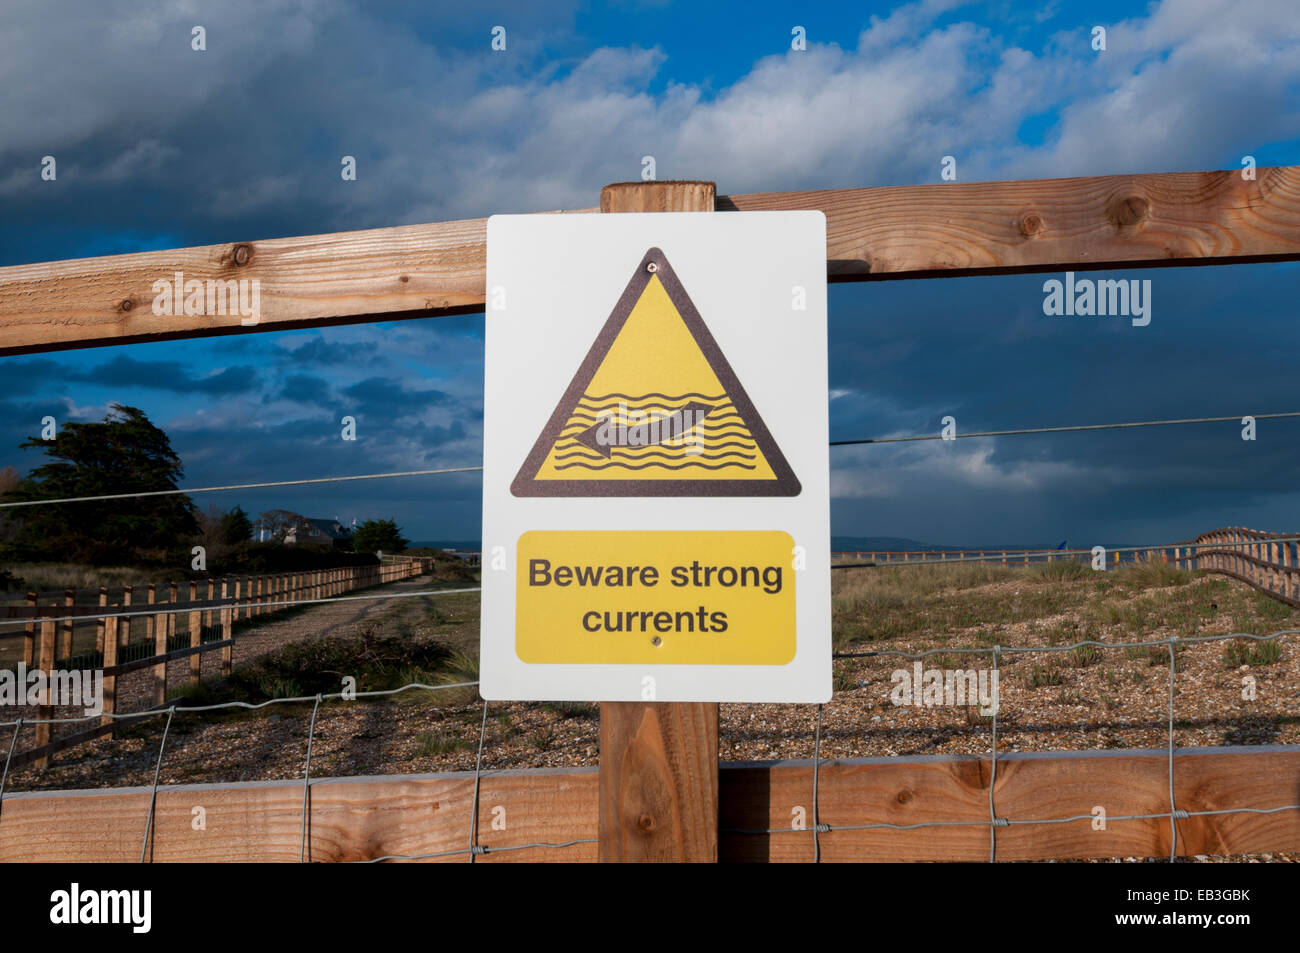 Beware strong currents warning sign by the beach Stock Photo